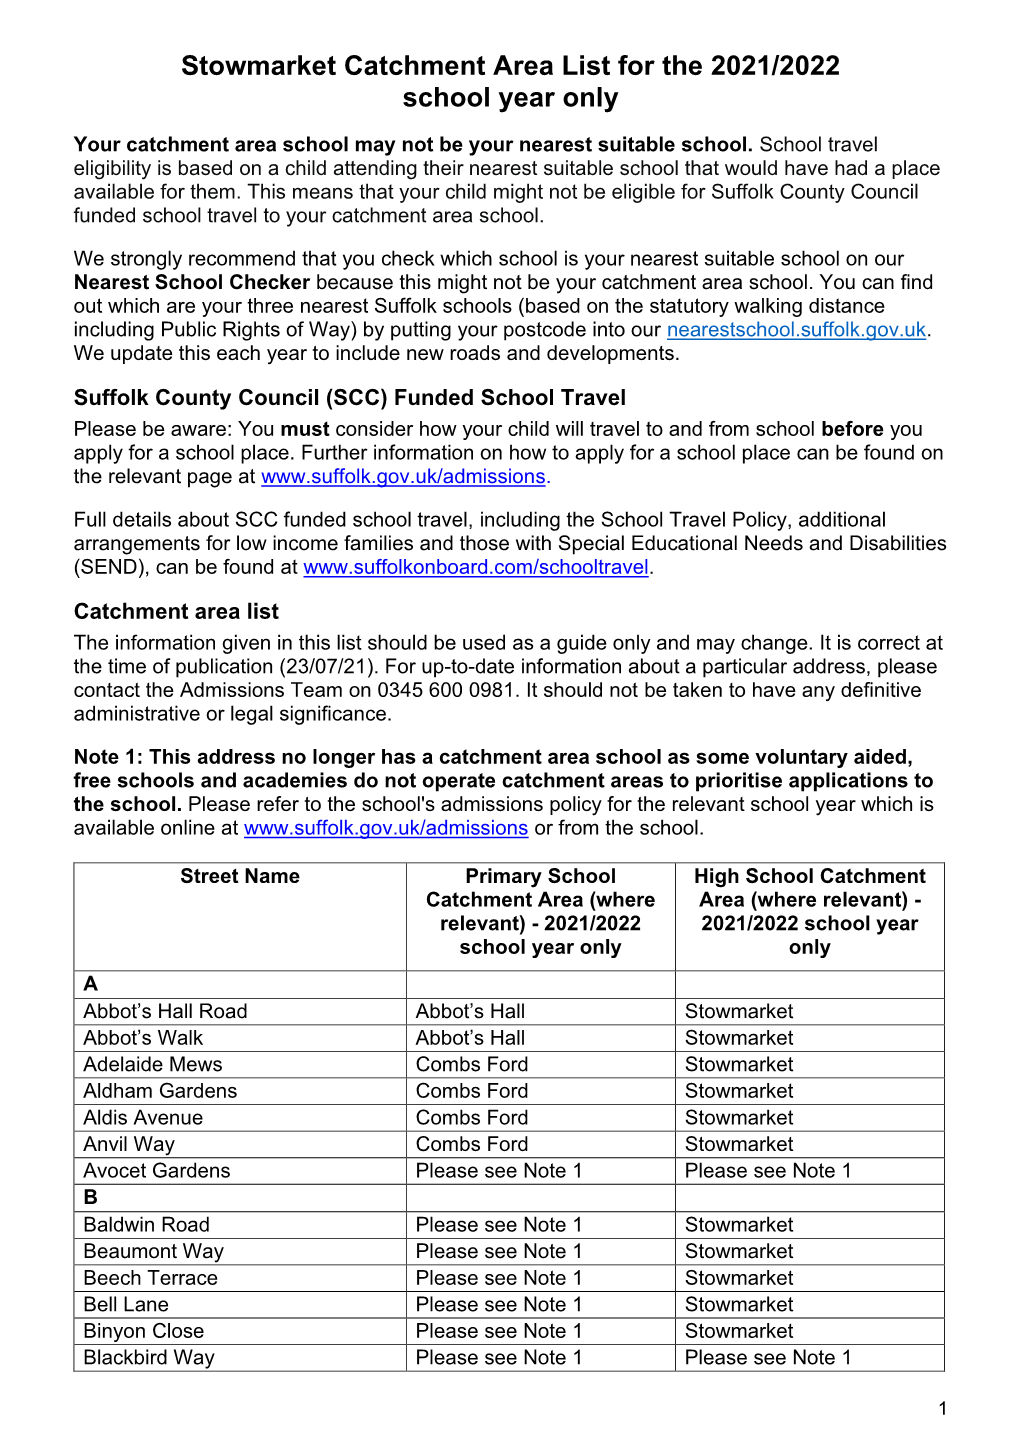 Stowmarket Catchment Area List for the 2021/2022 School Year Only